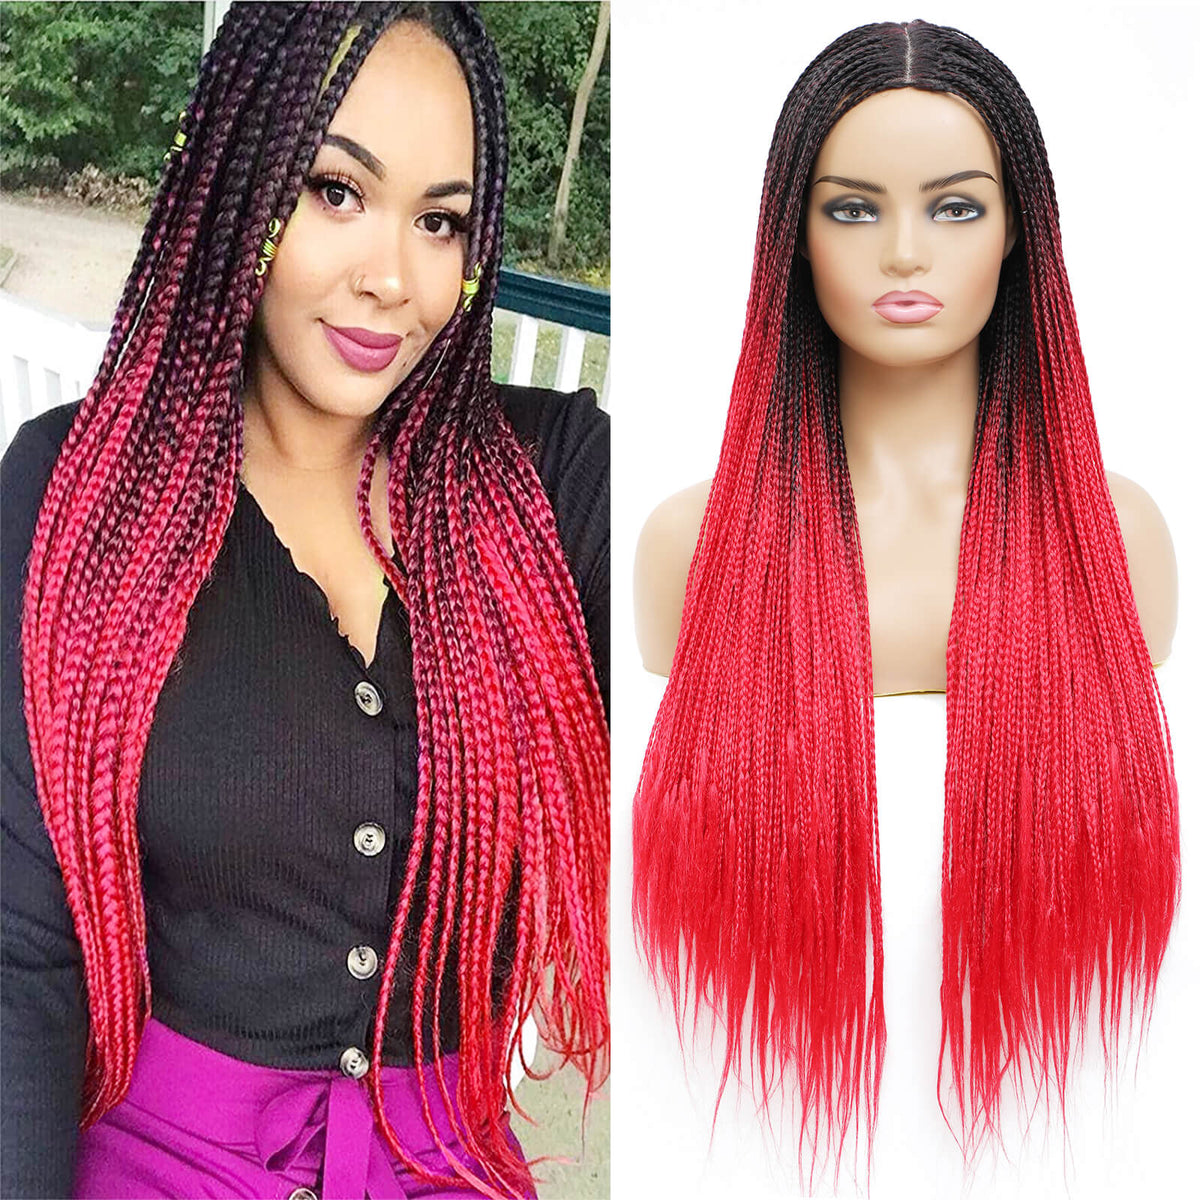 Black Green Ombre Twists Braided Wig